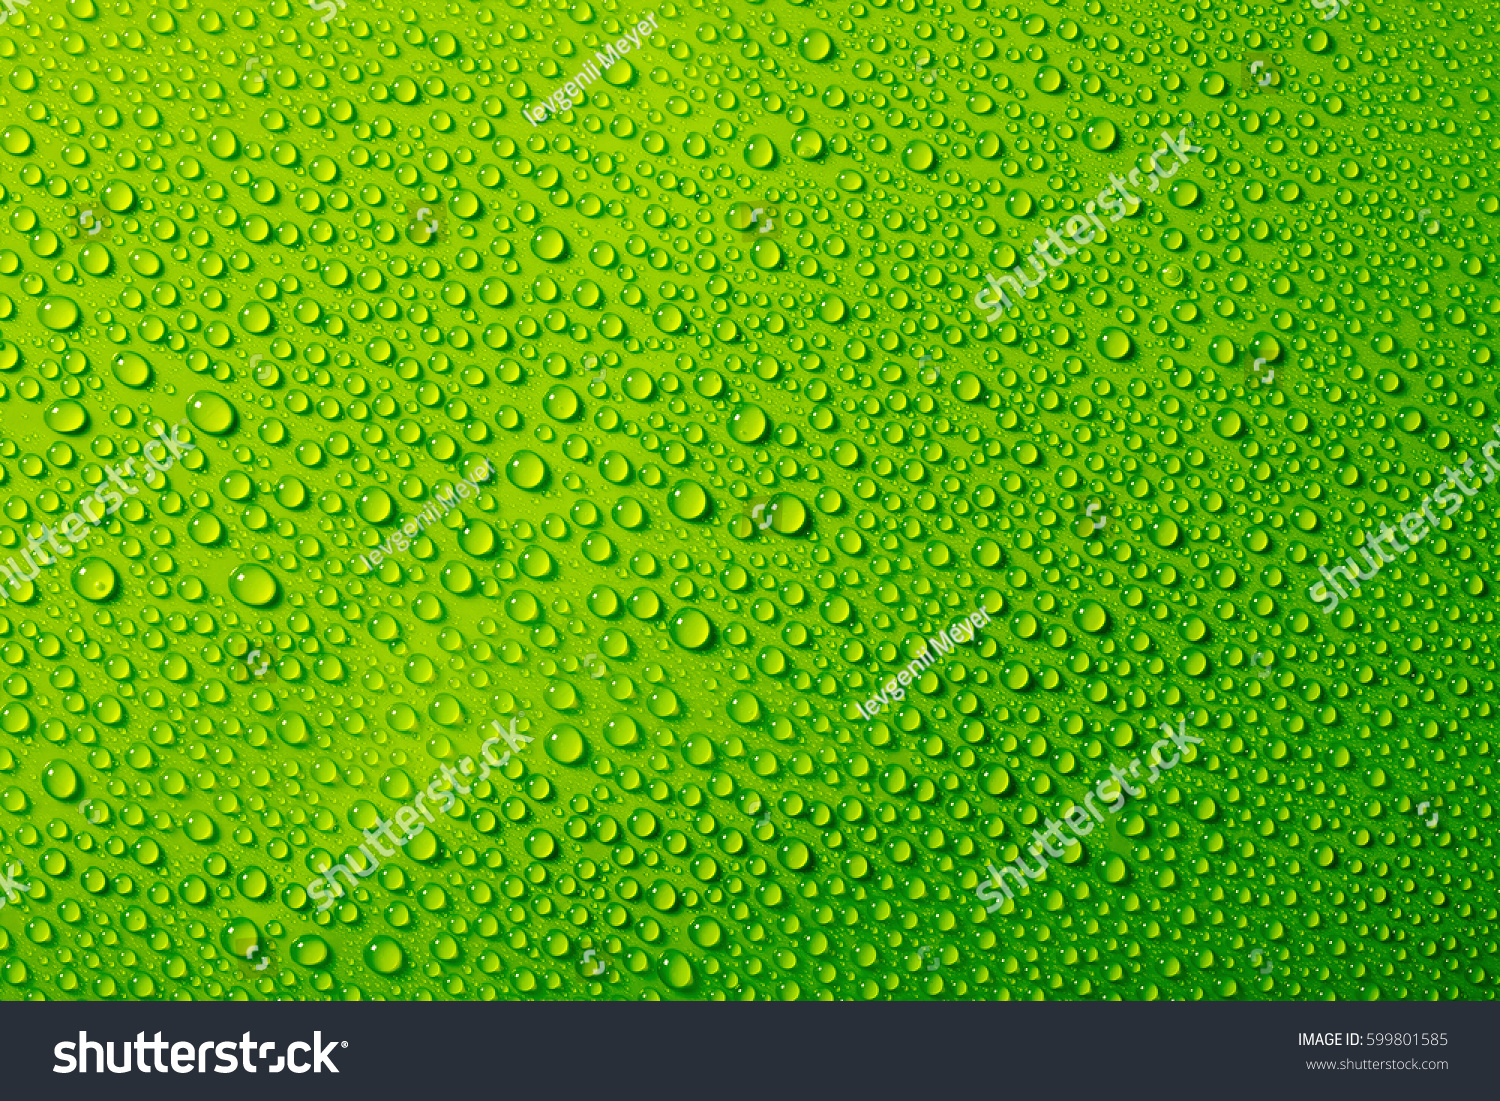 995,758 Water drop green Stock Photos, Images & Photography | Shutterstock